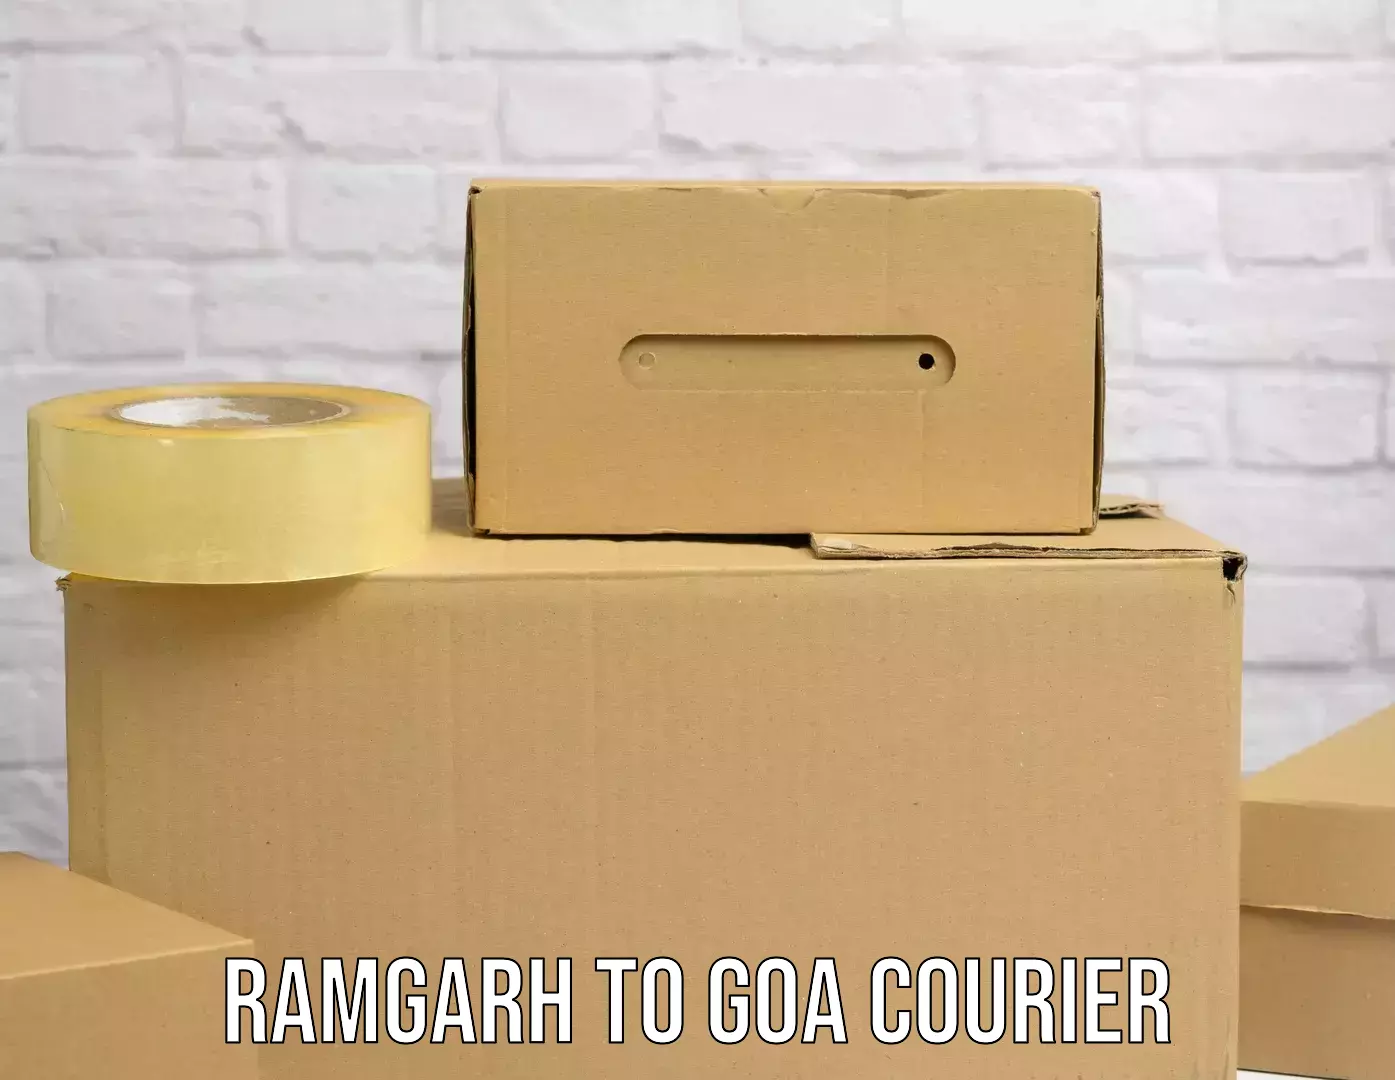 Easy return solutions in Ramgarh to Goa